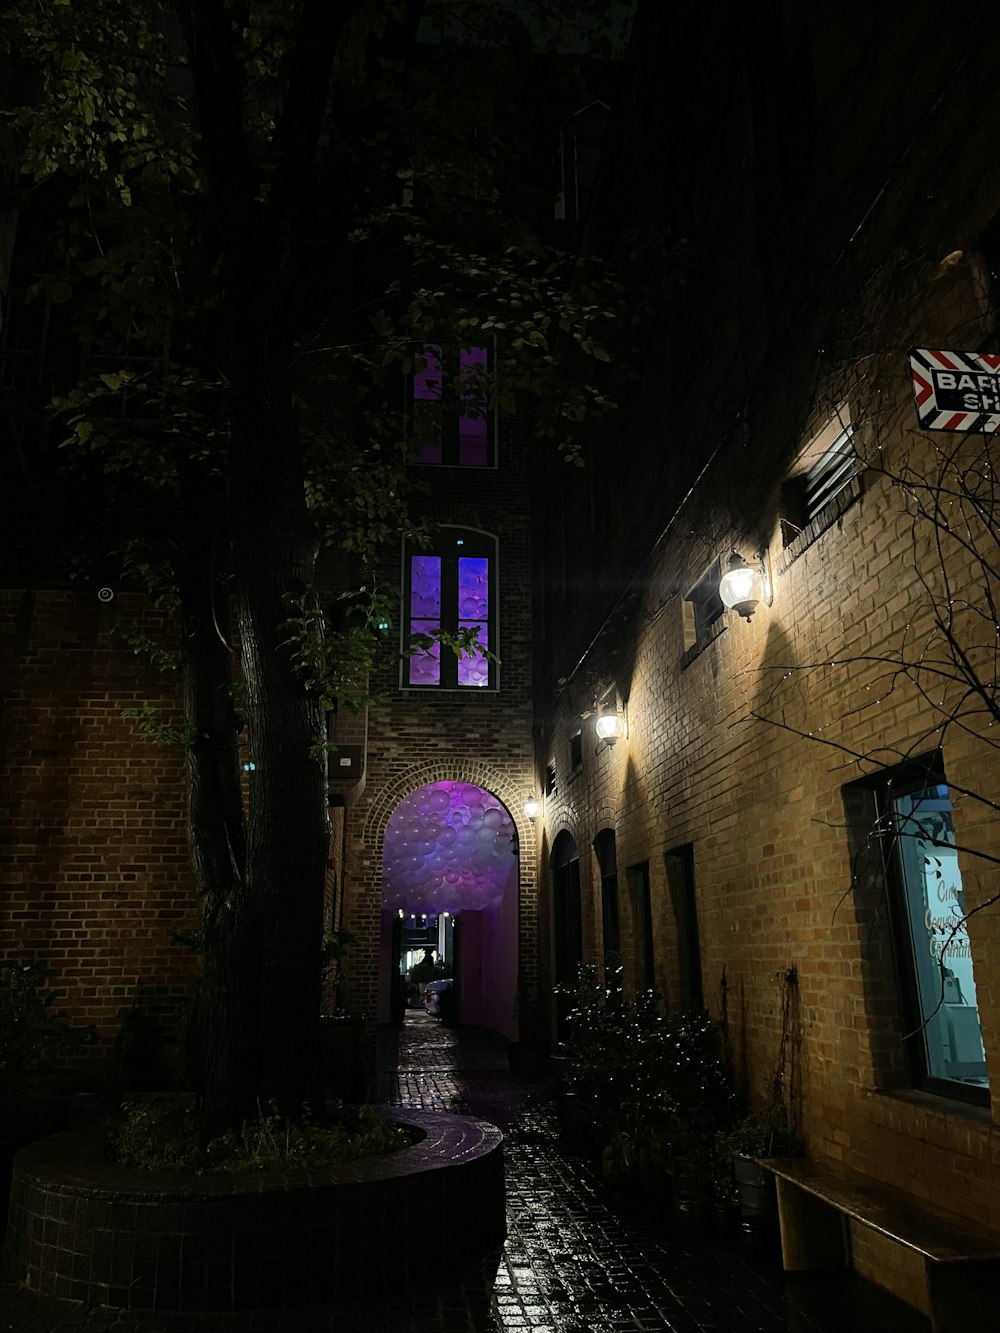 a brick building with a purple archway